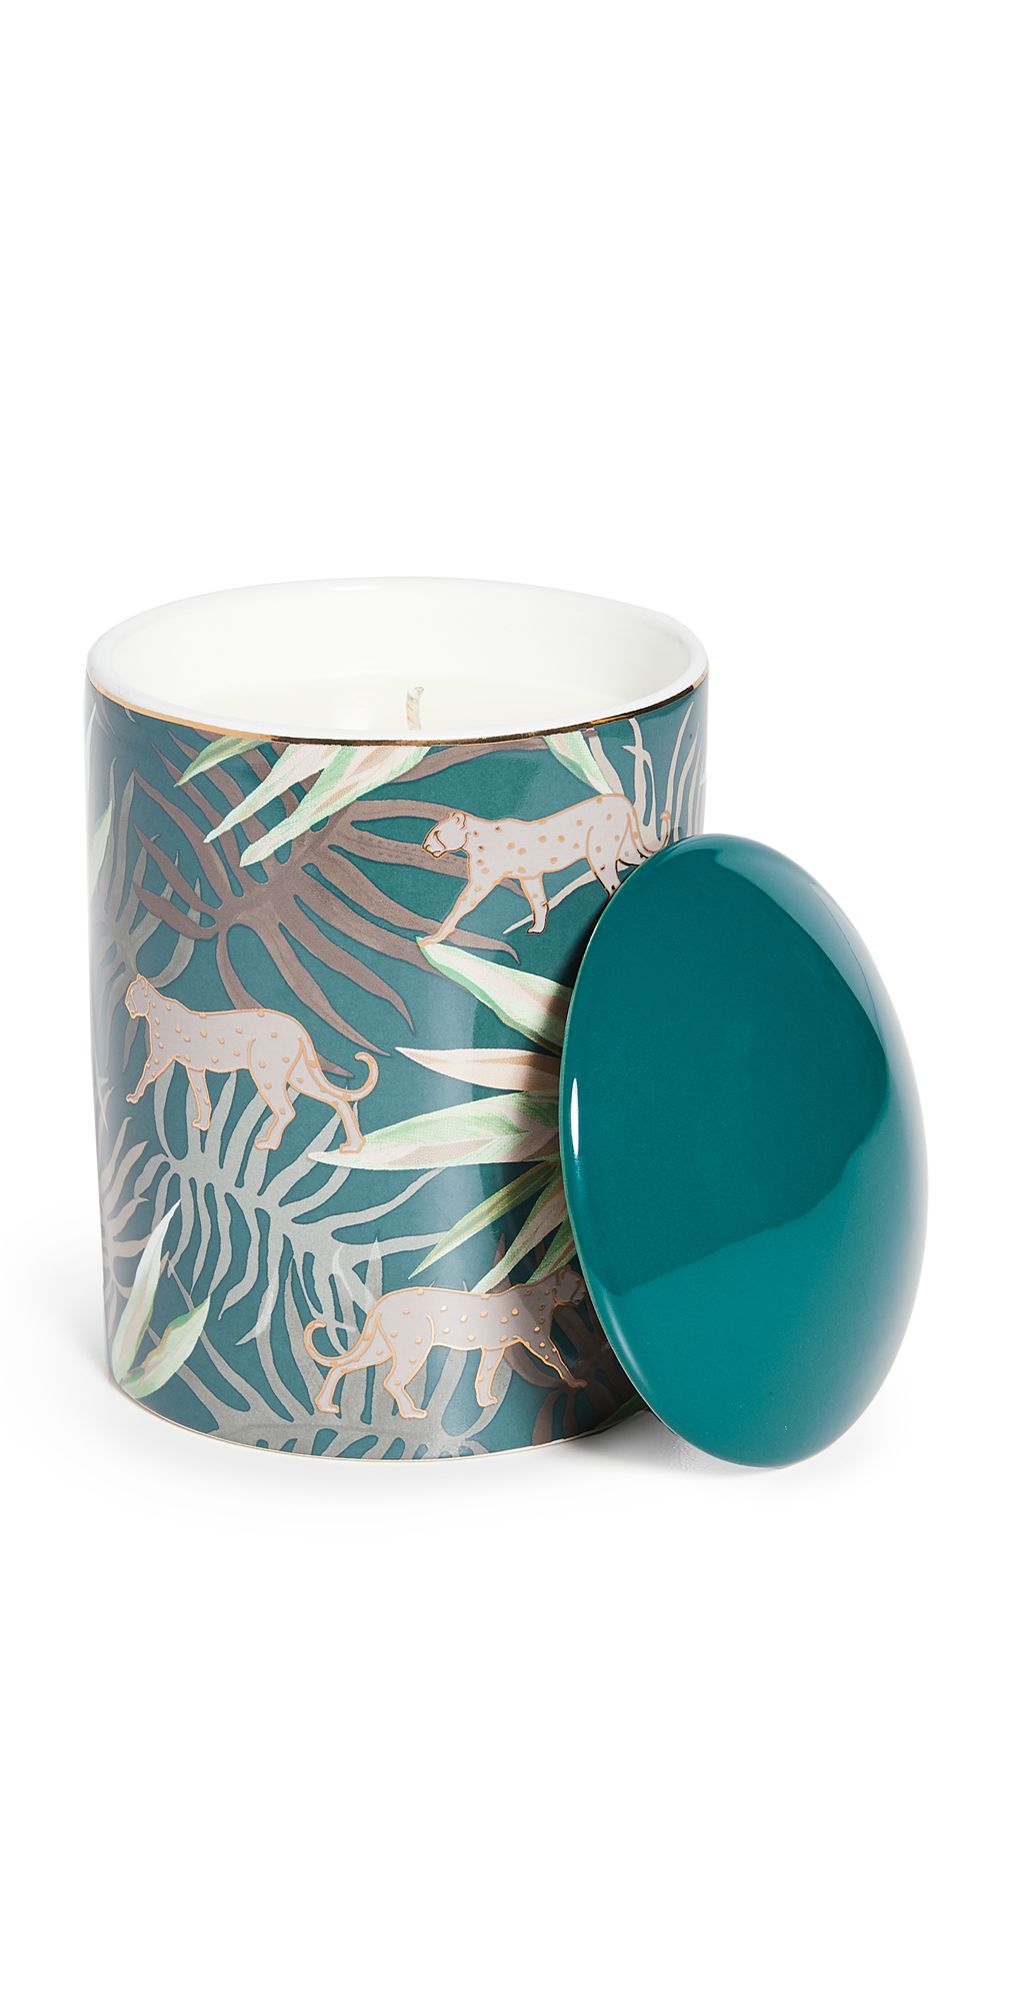 L'or de Seraphine Large Ares Candle | Shopbop